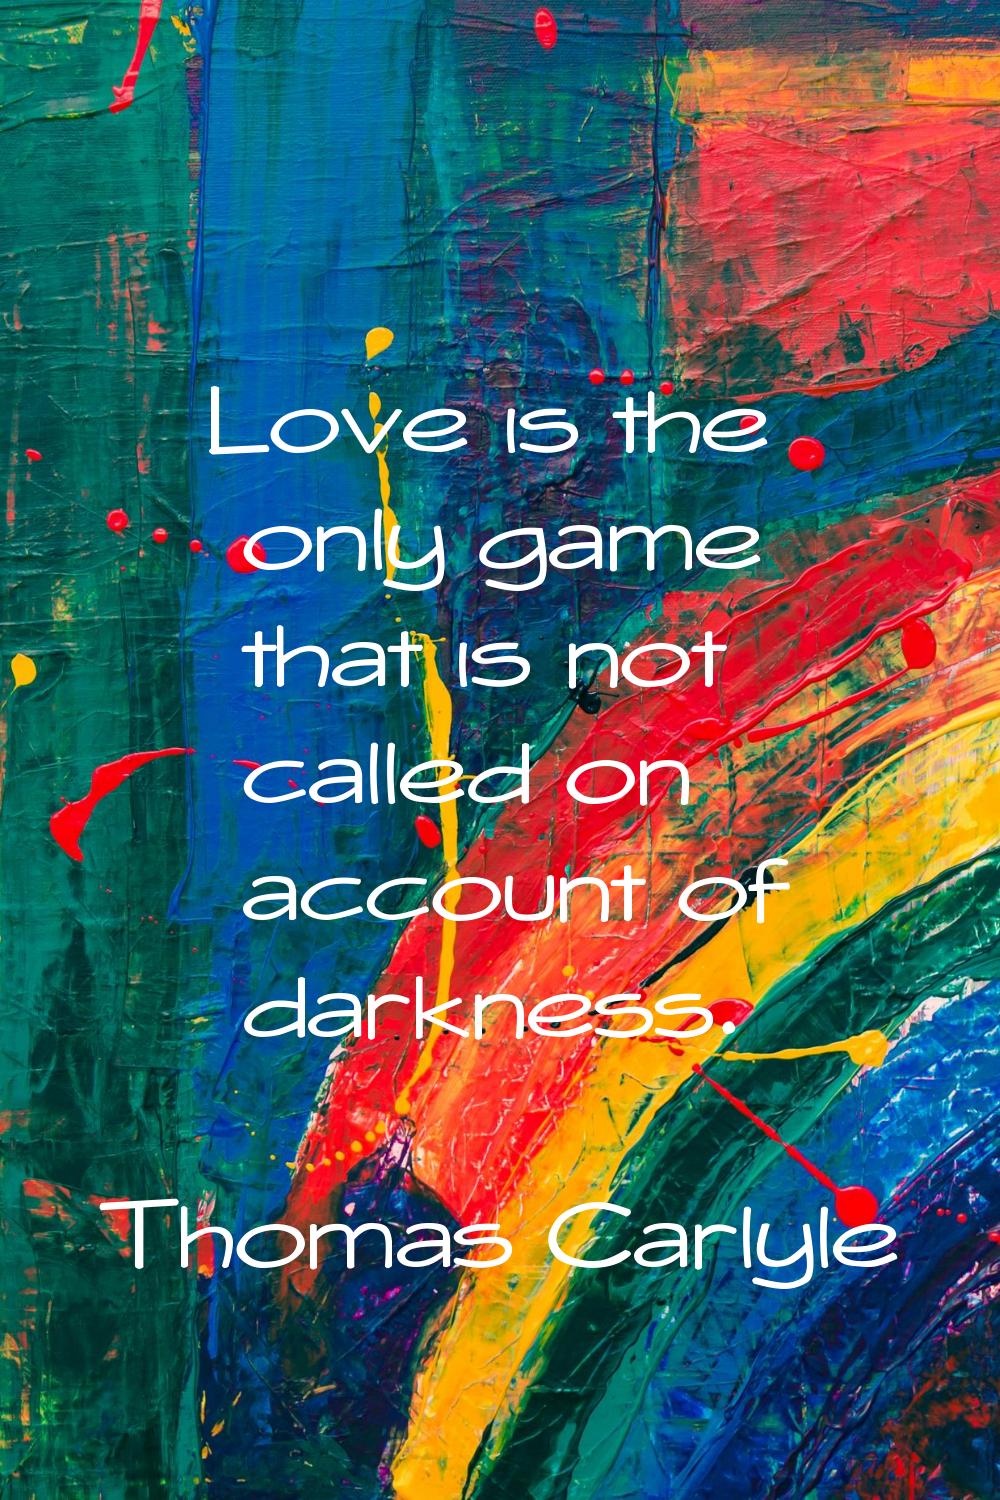 Love is the only game that is not called on account of darkness.